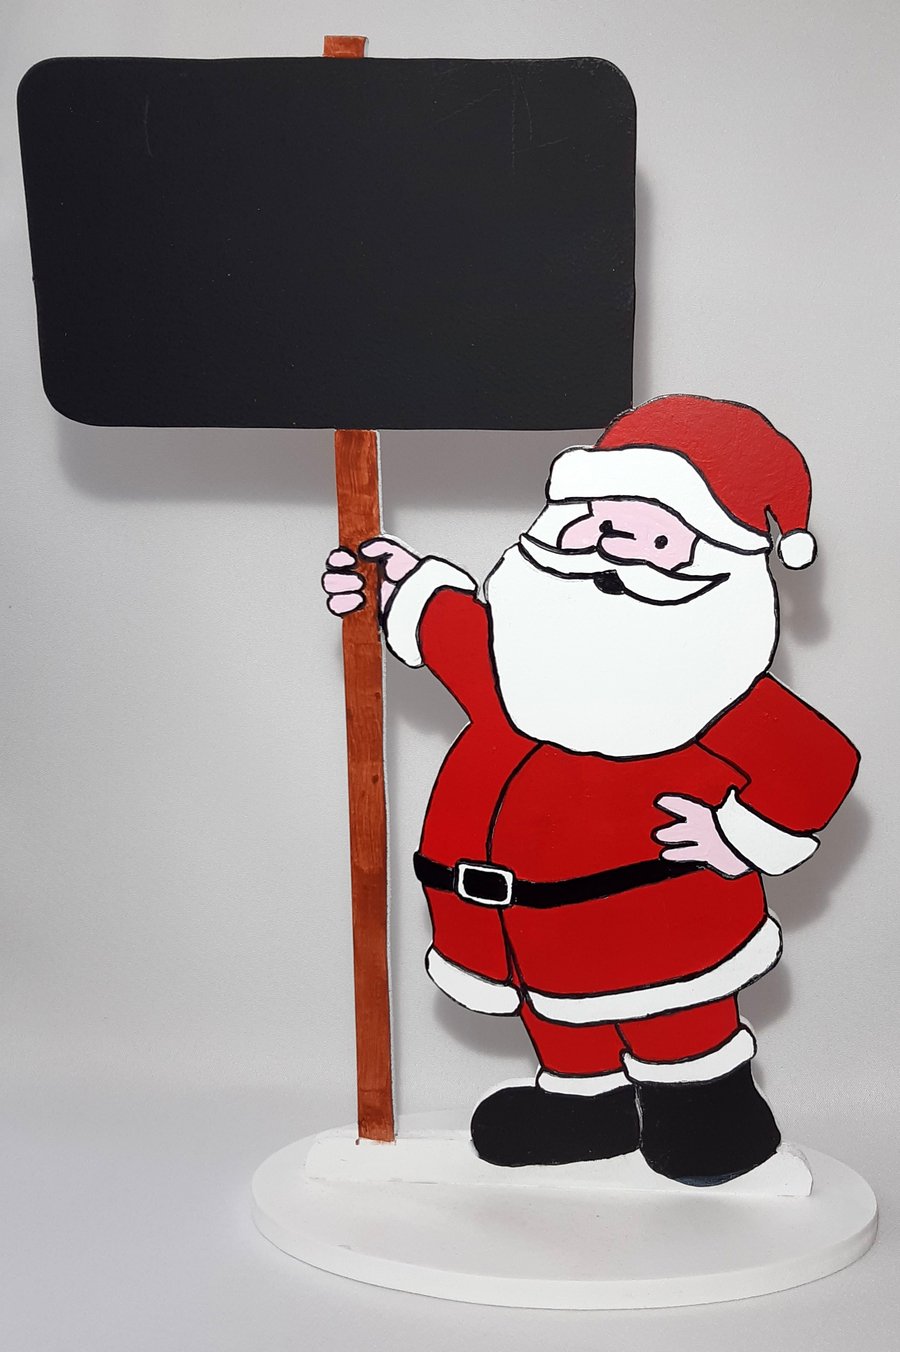 Santa holding a chalkboard placard. Ideal for counting down to Chriatmas (OR14)